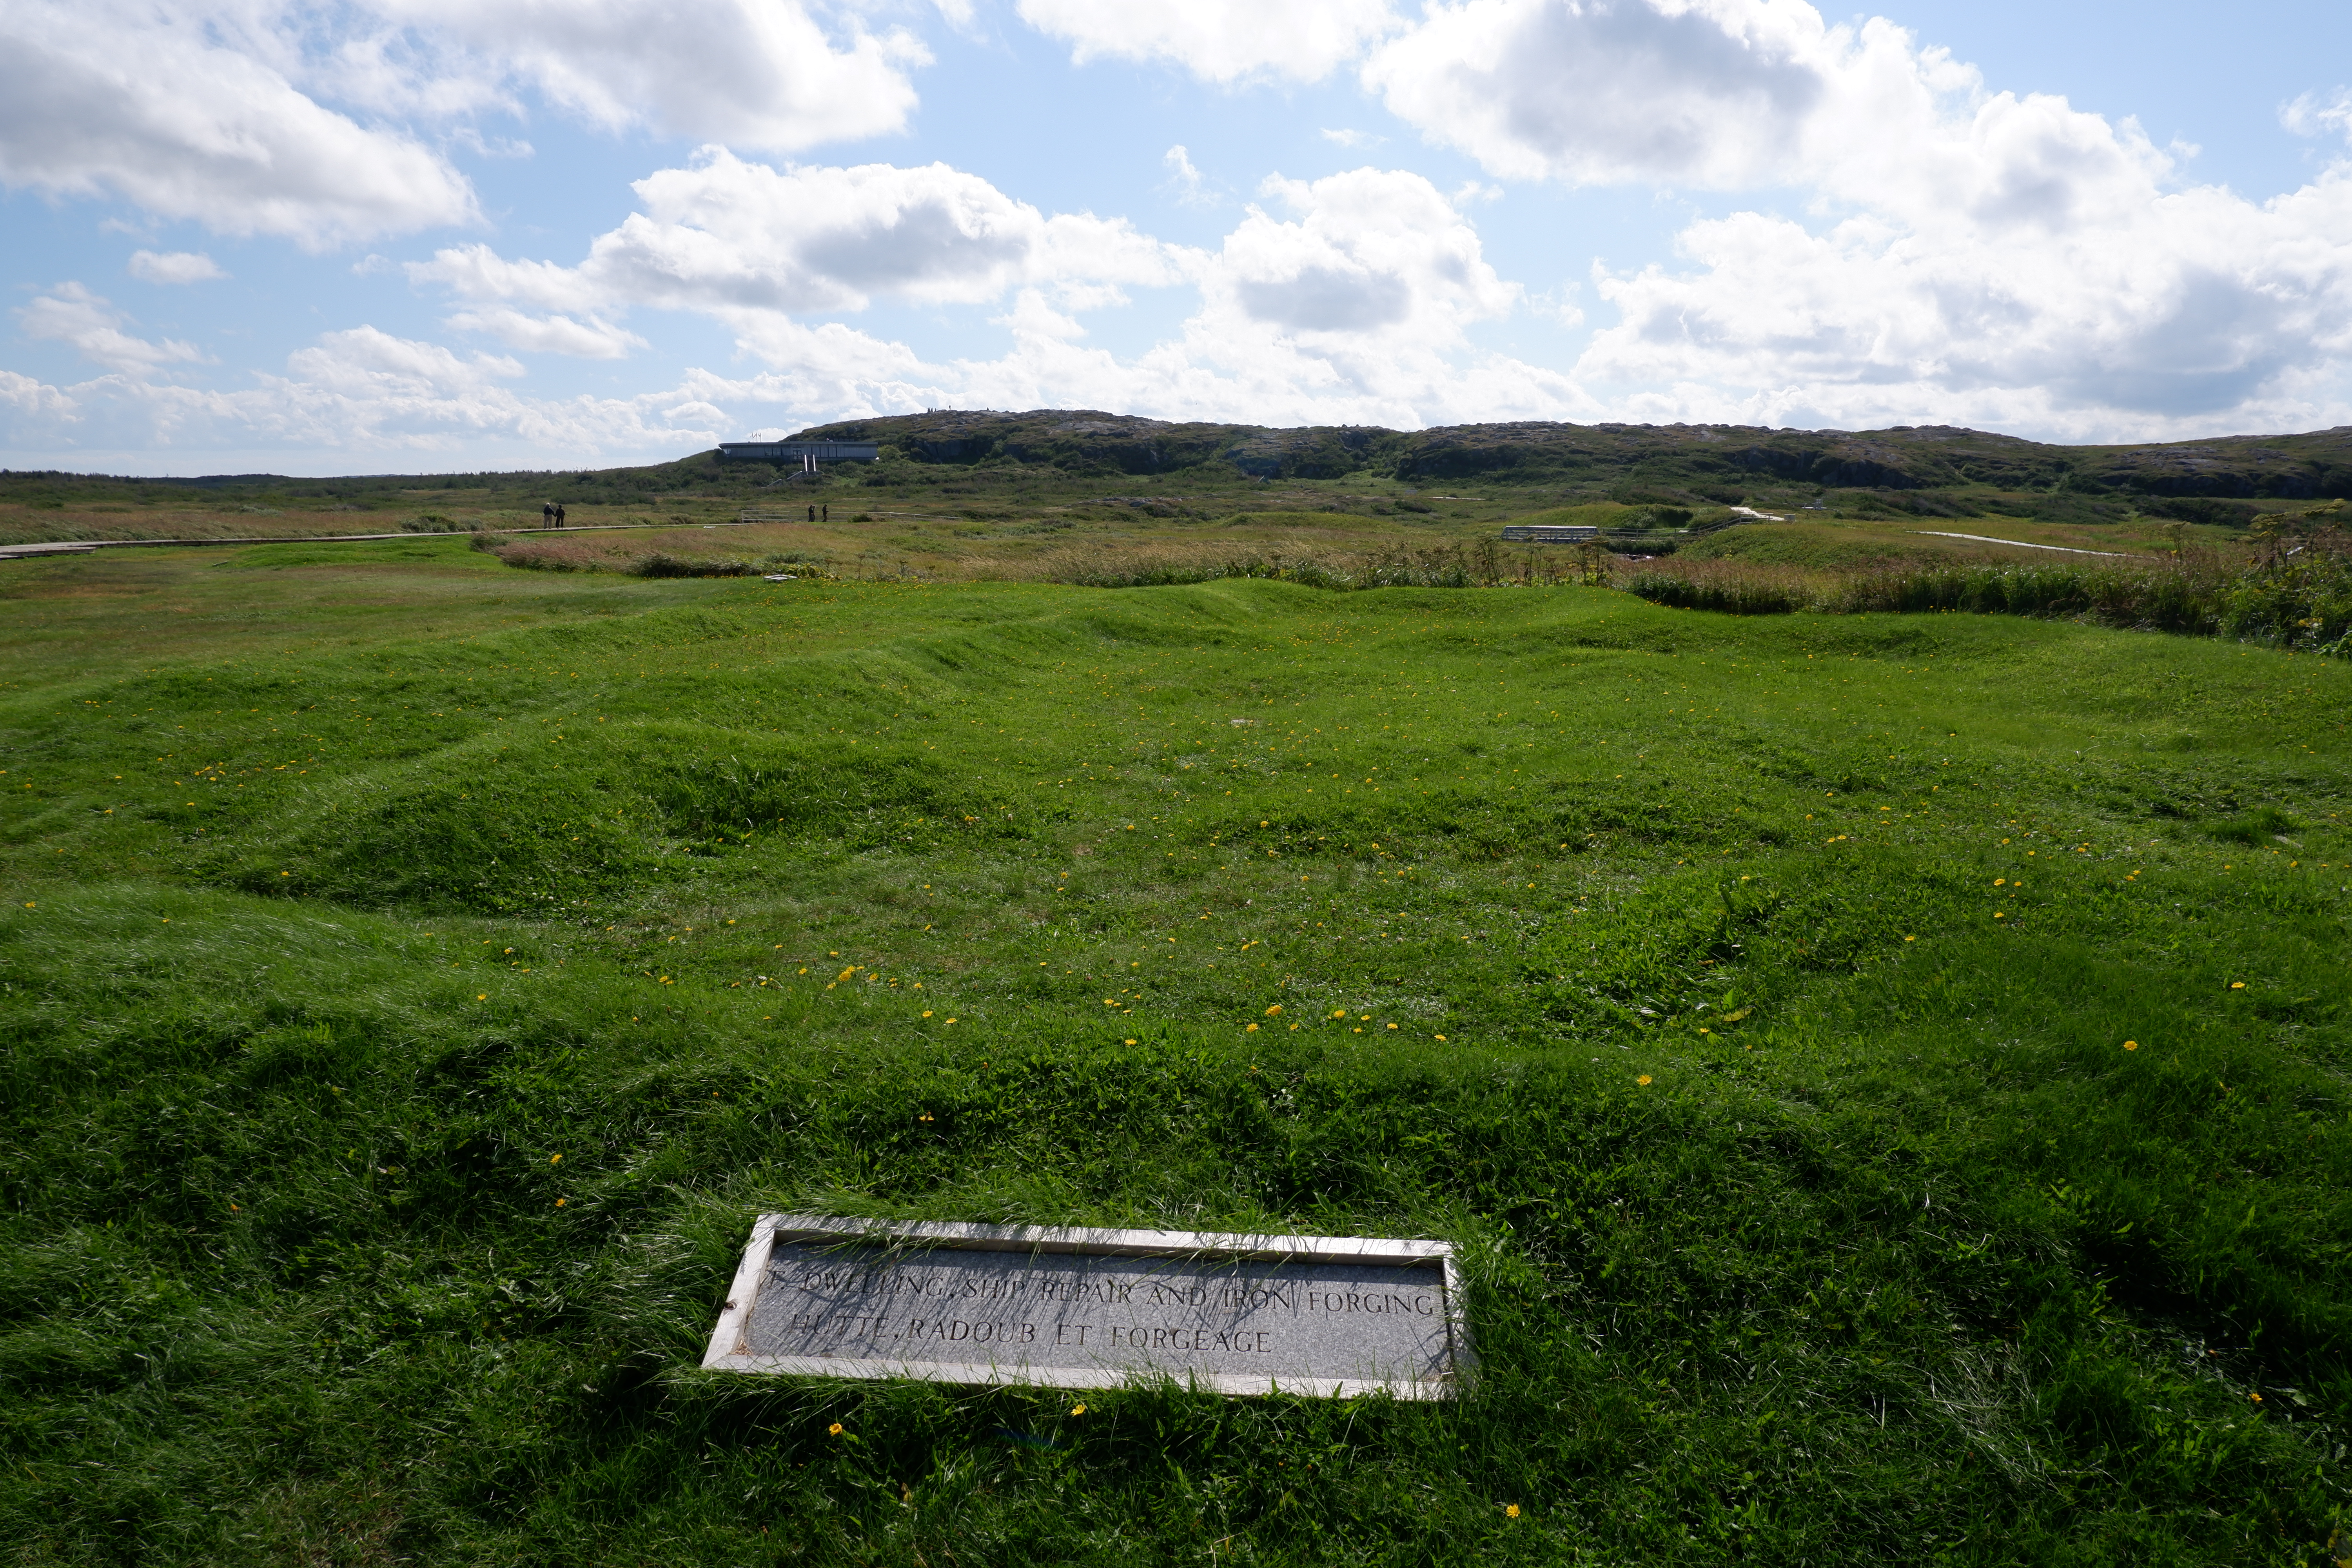 Grassy area with a stone plaque reading "Dwellings, Ship Repair, Iron Forging Hutte Radoub et Forgage."